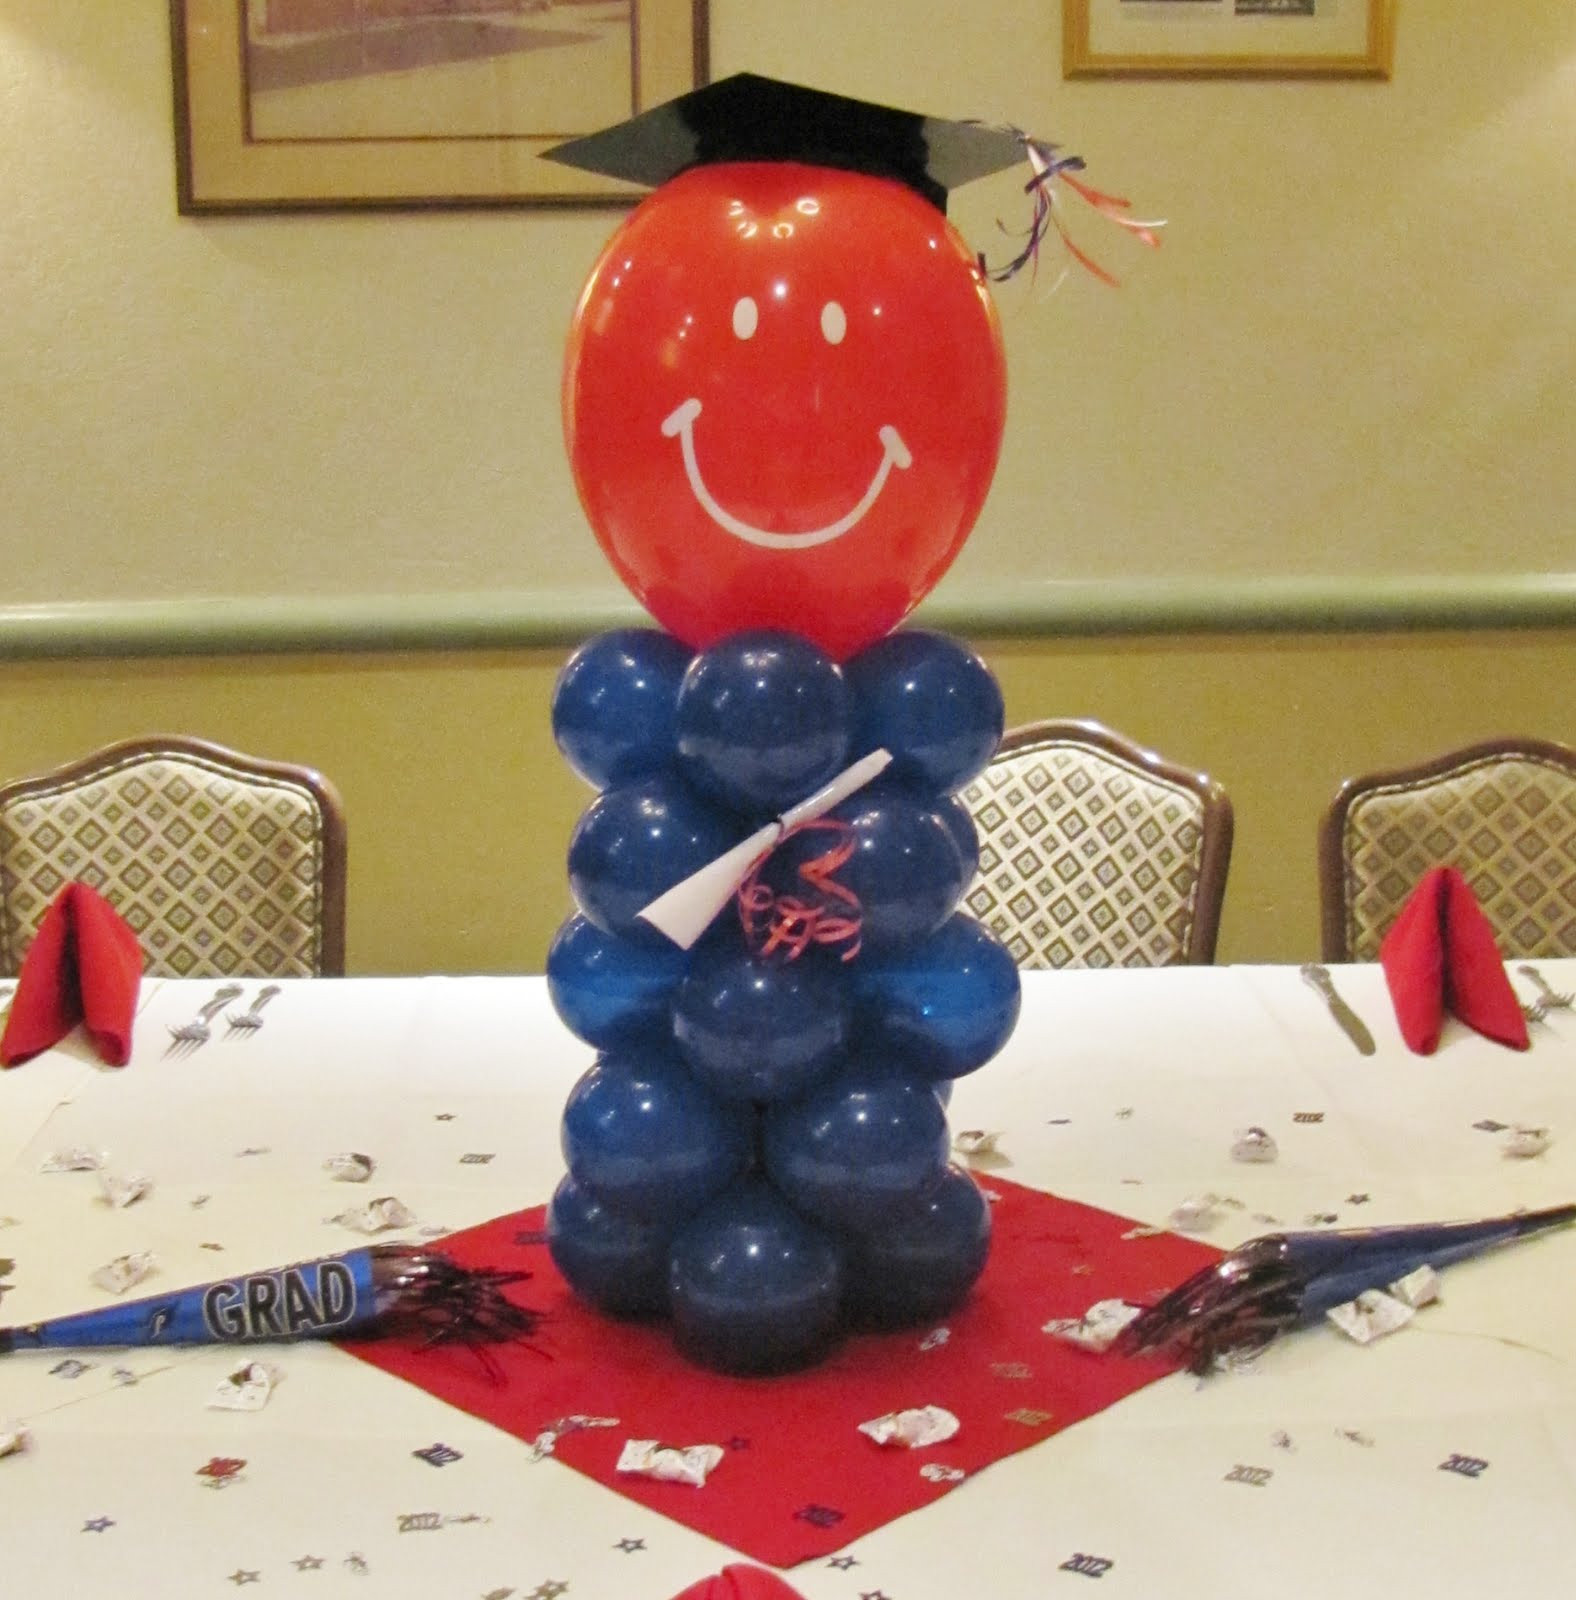 Graduation Party Balloon Ideas
 Party People Event Decorating pany Graduation Party